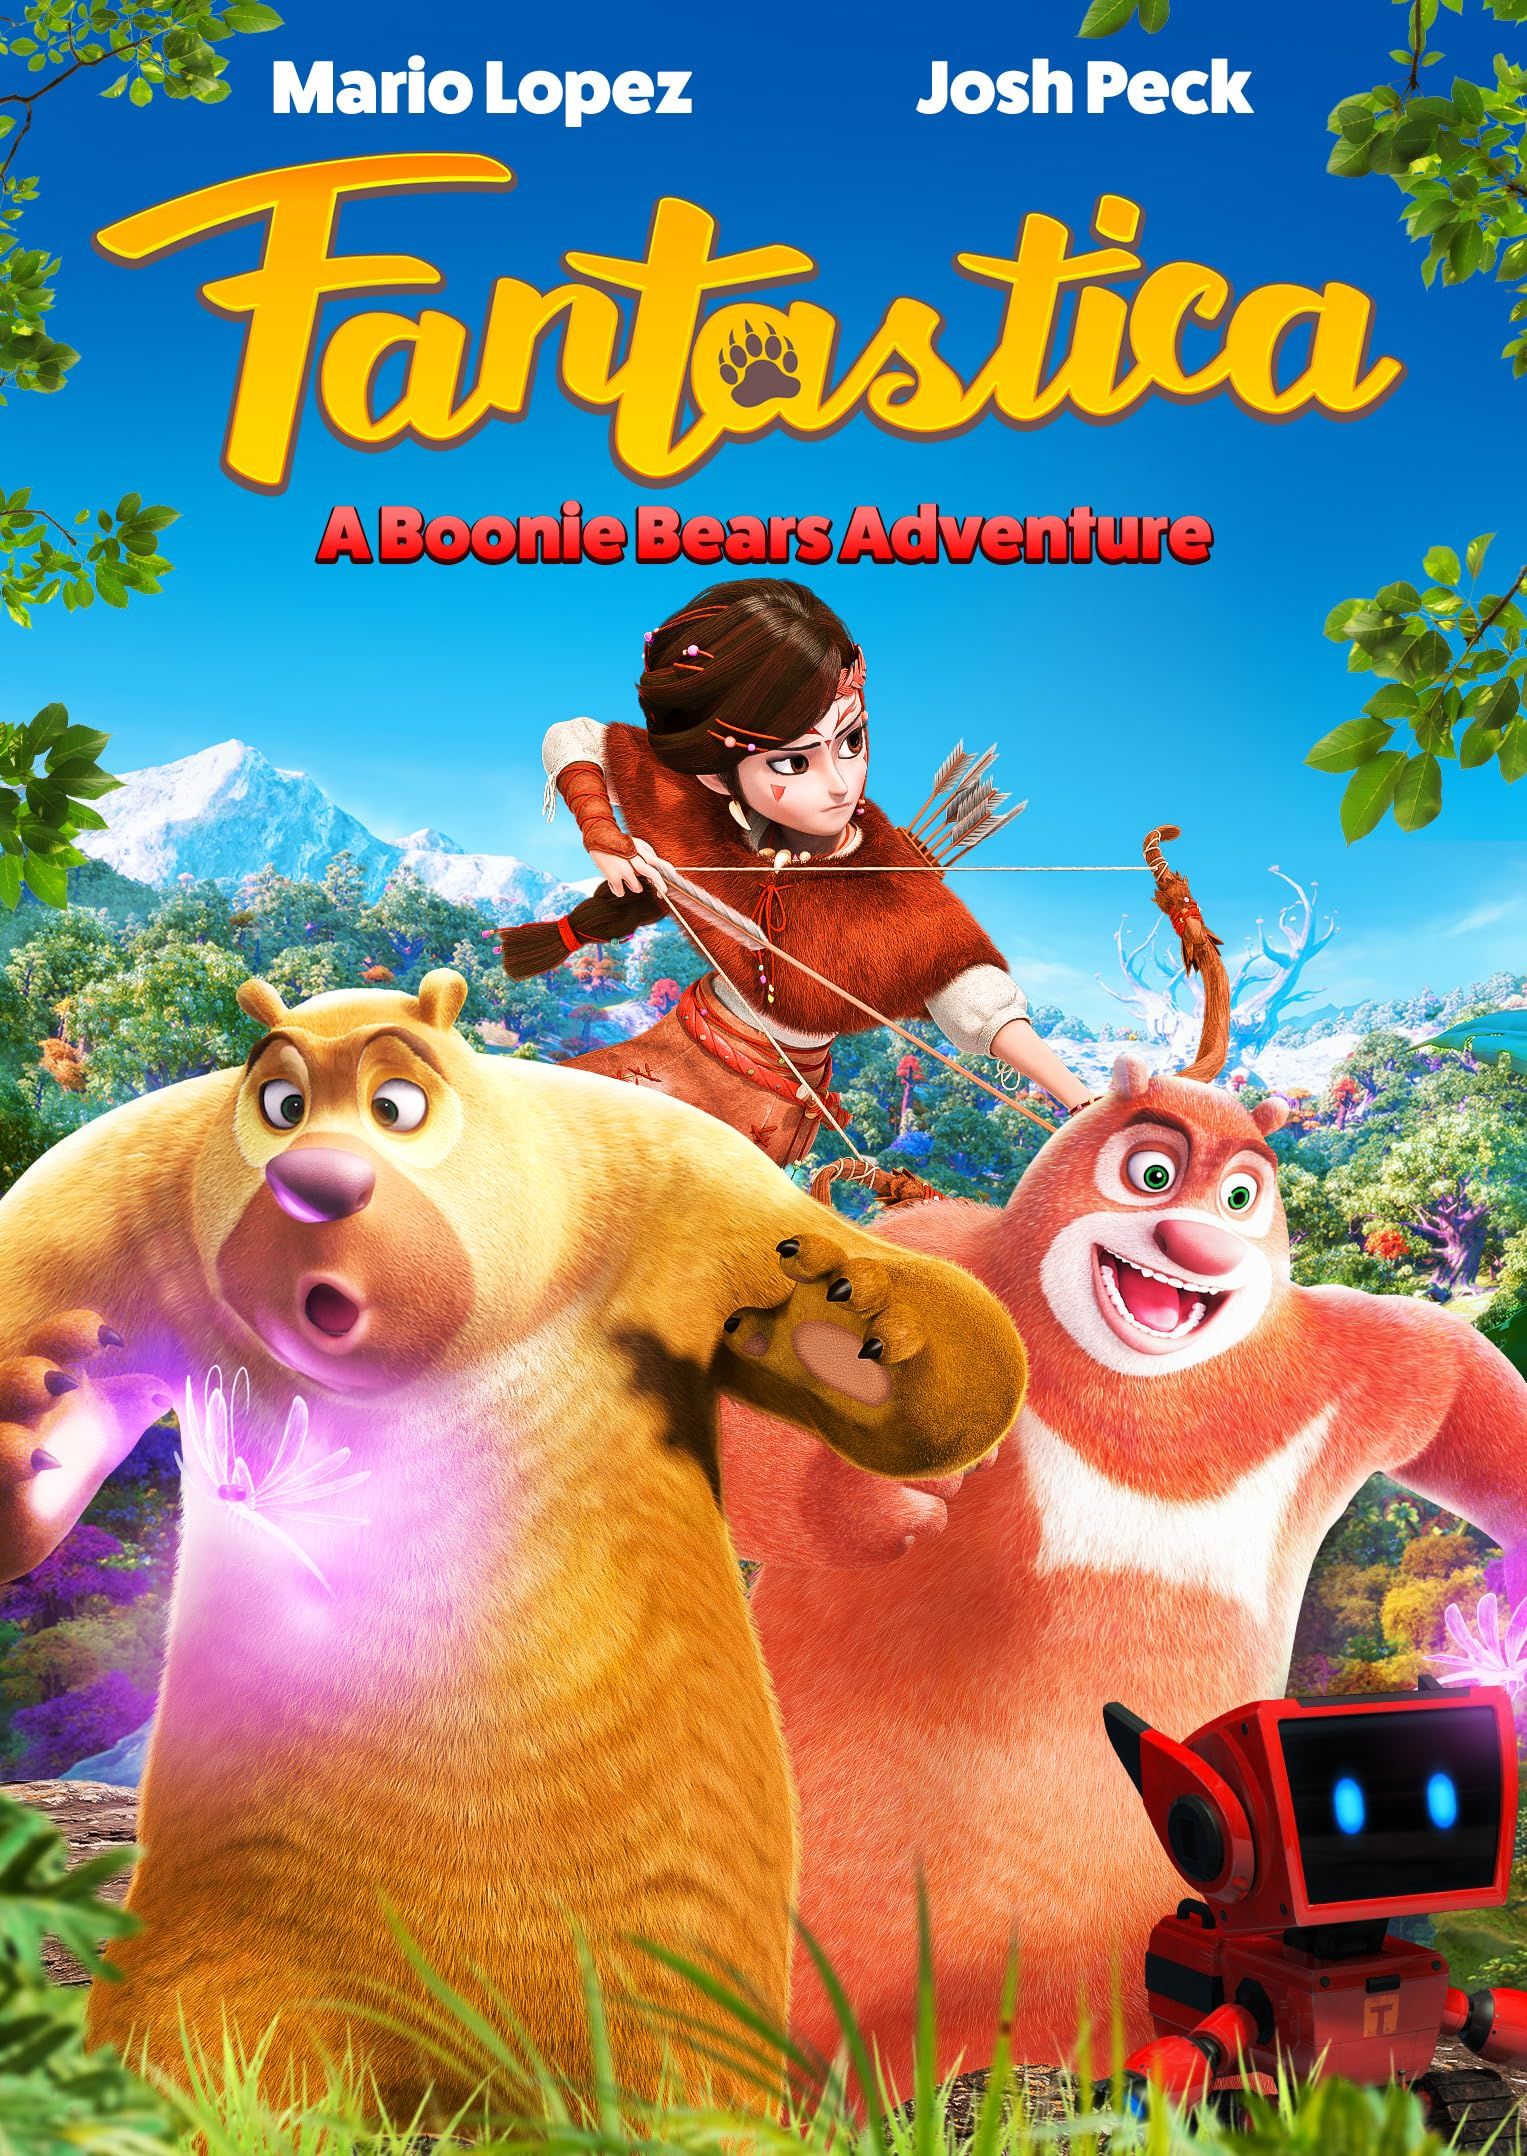 Fantastica: A Boonie Bears Adventure (2017) Hindi Dubbed download full movie